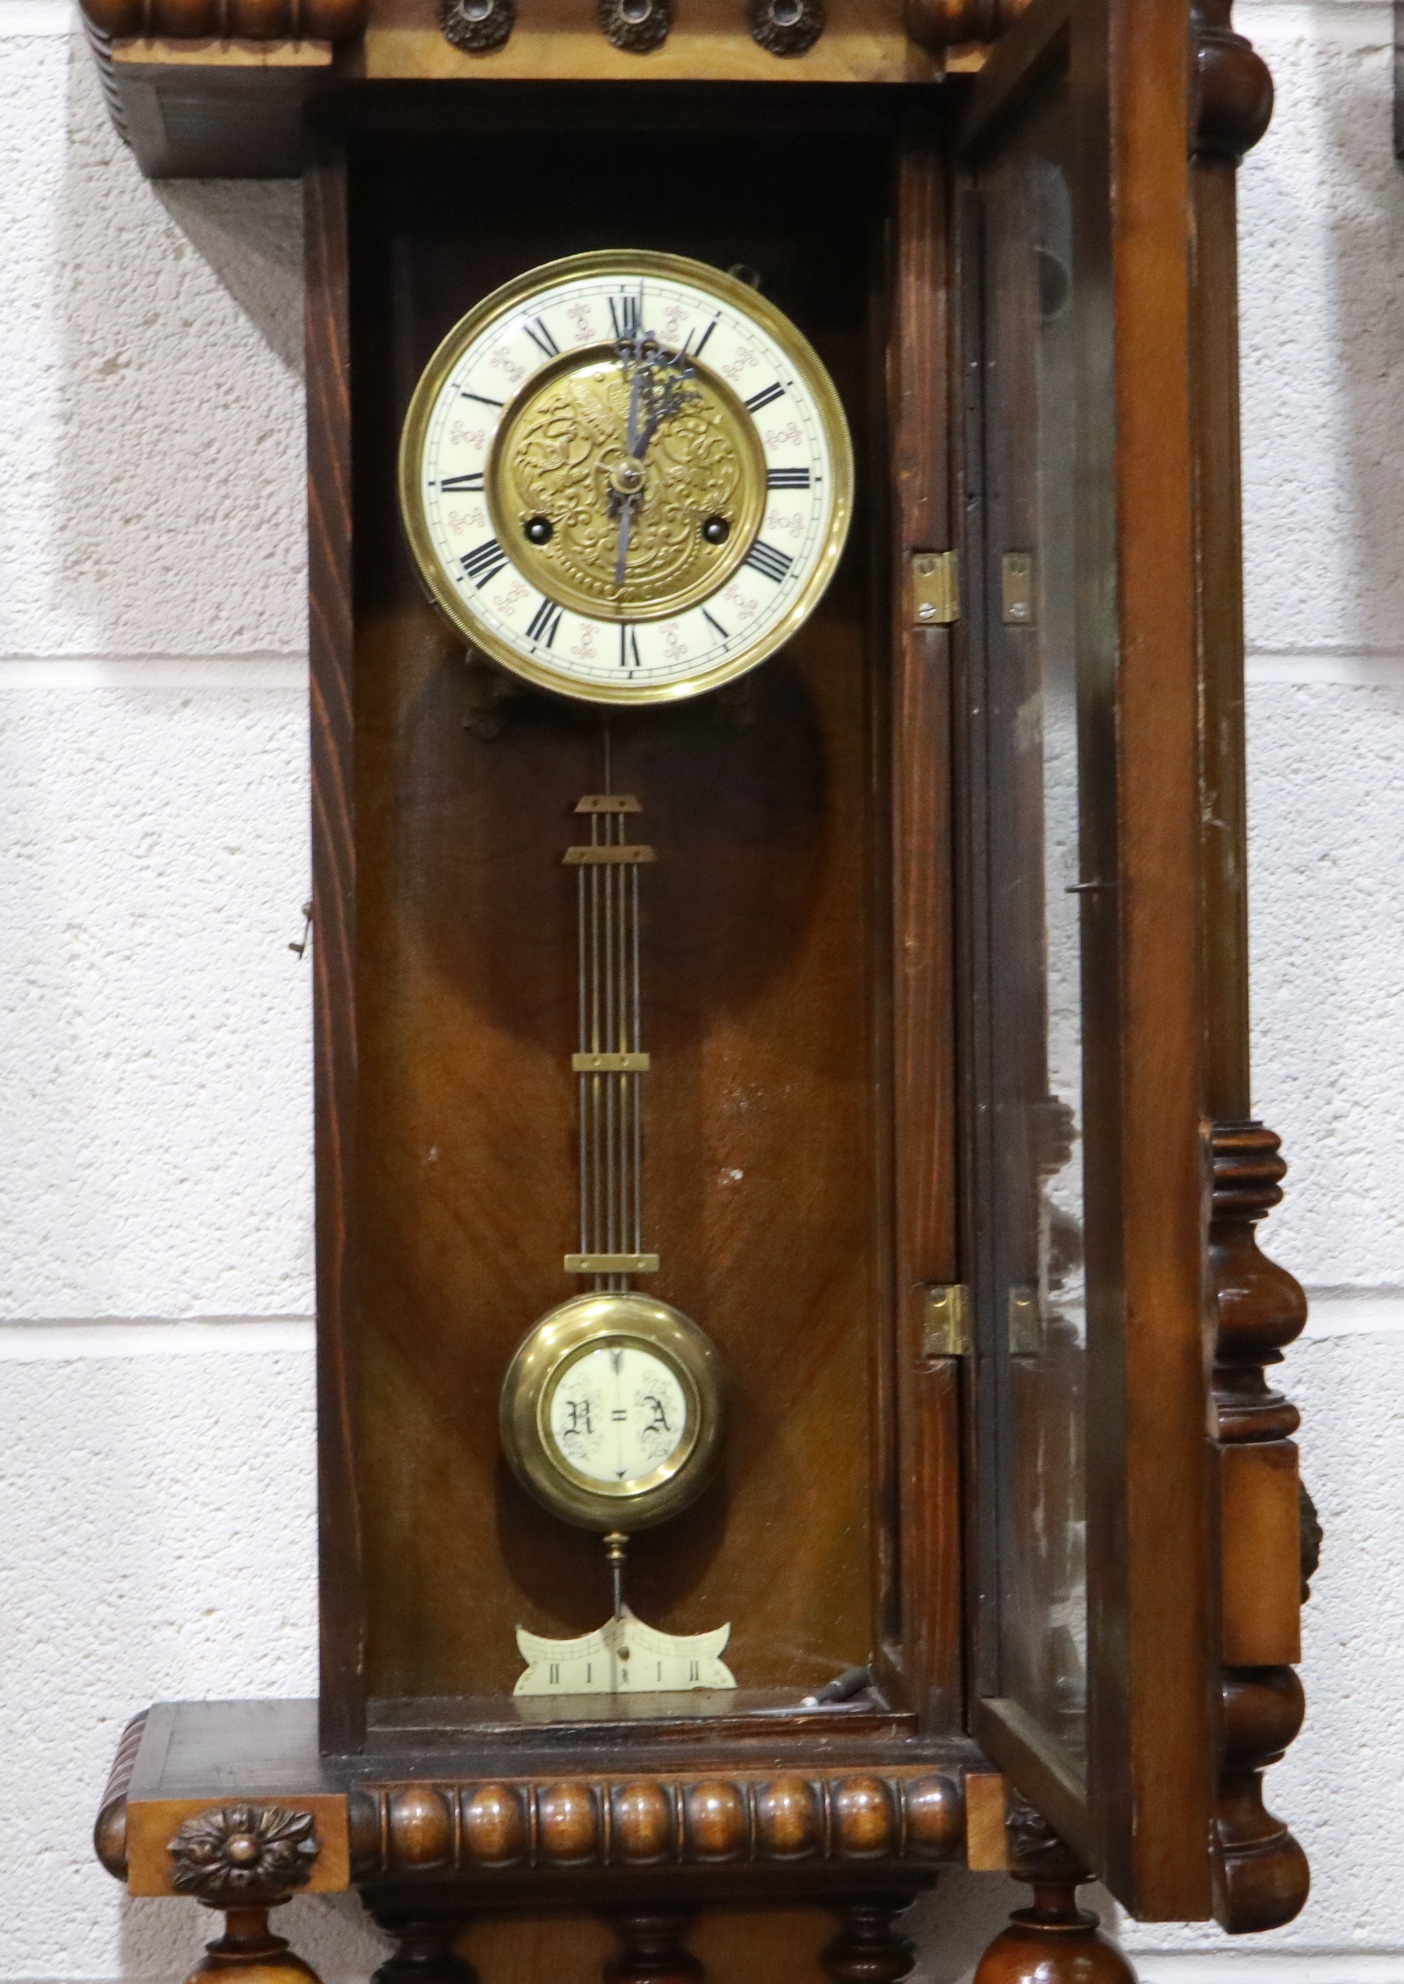 19th century walnut cased Vienna wall clock with pendulum display door, H: 105 cm. Not available for - Image 2 of 4